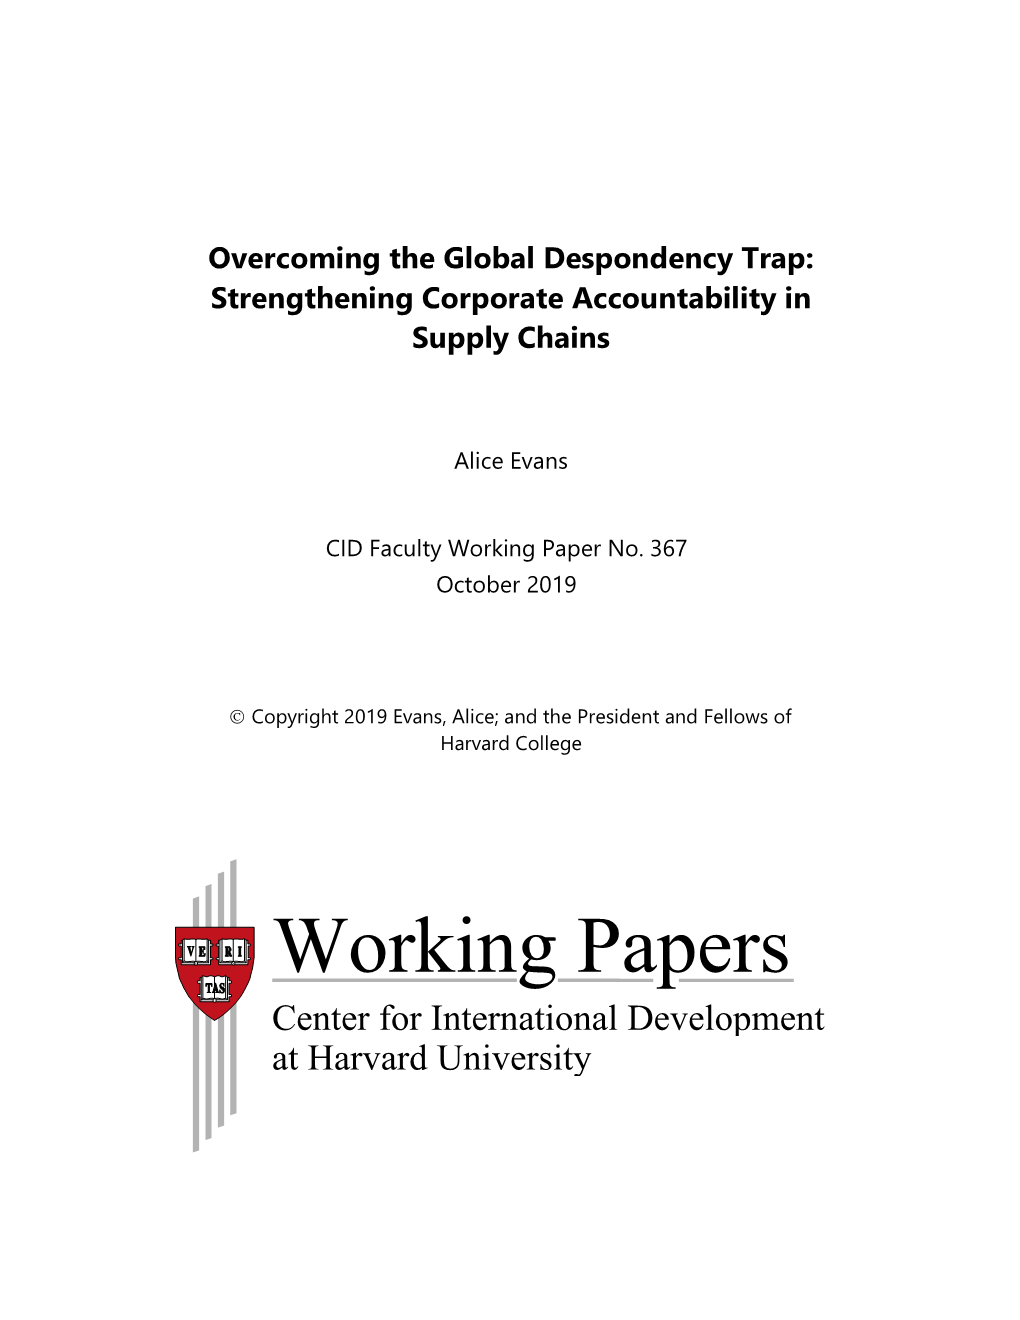 Overcoming the Global Despondency Trap: Strengthening Corporate Accountability in Supply Chains